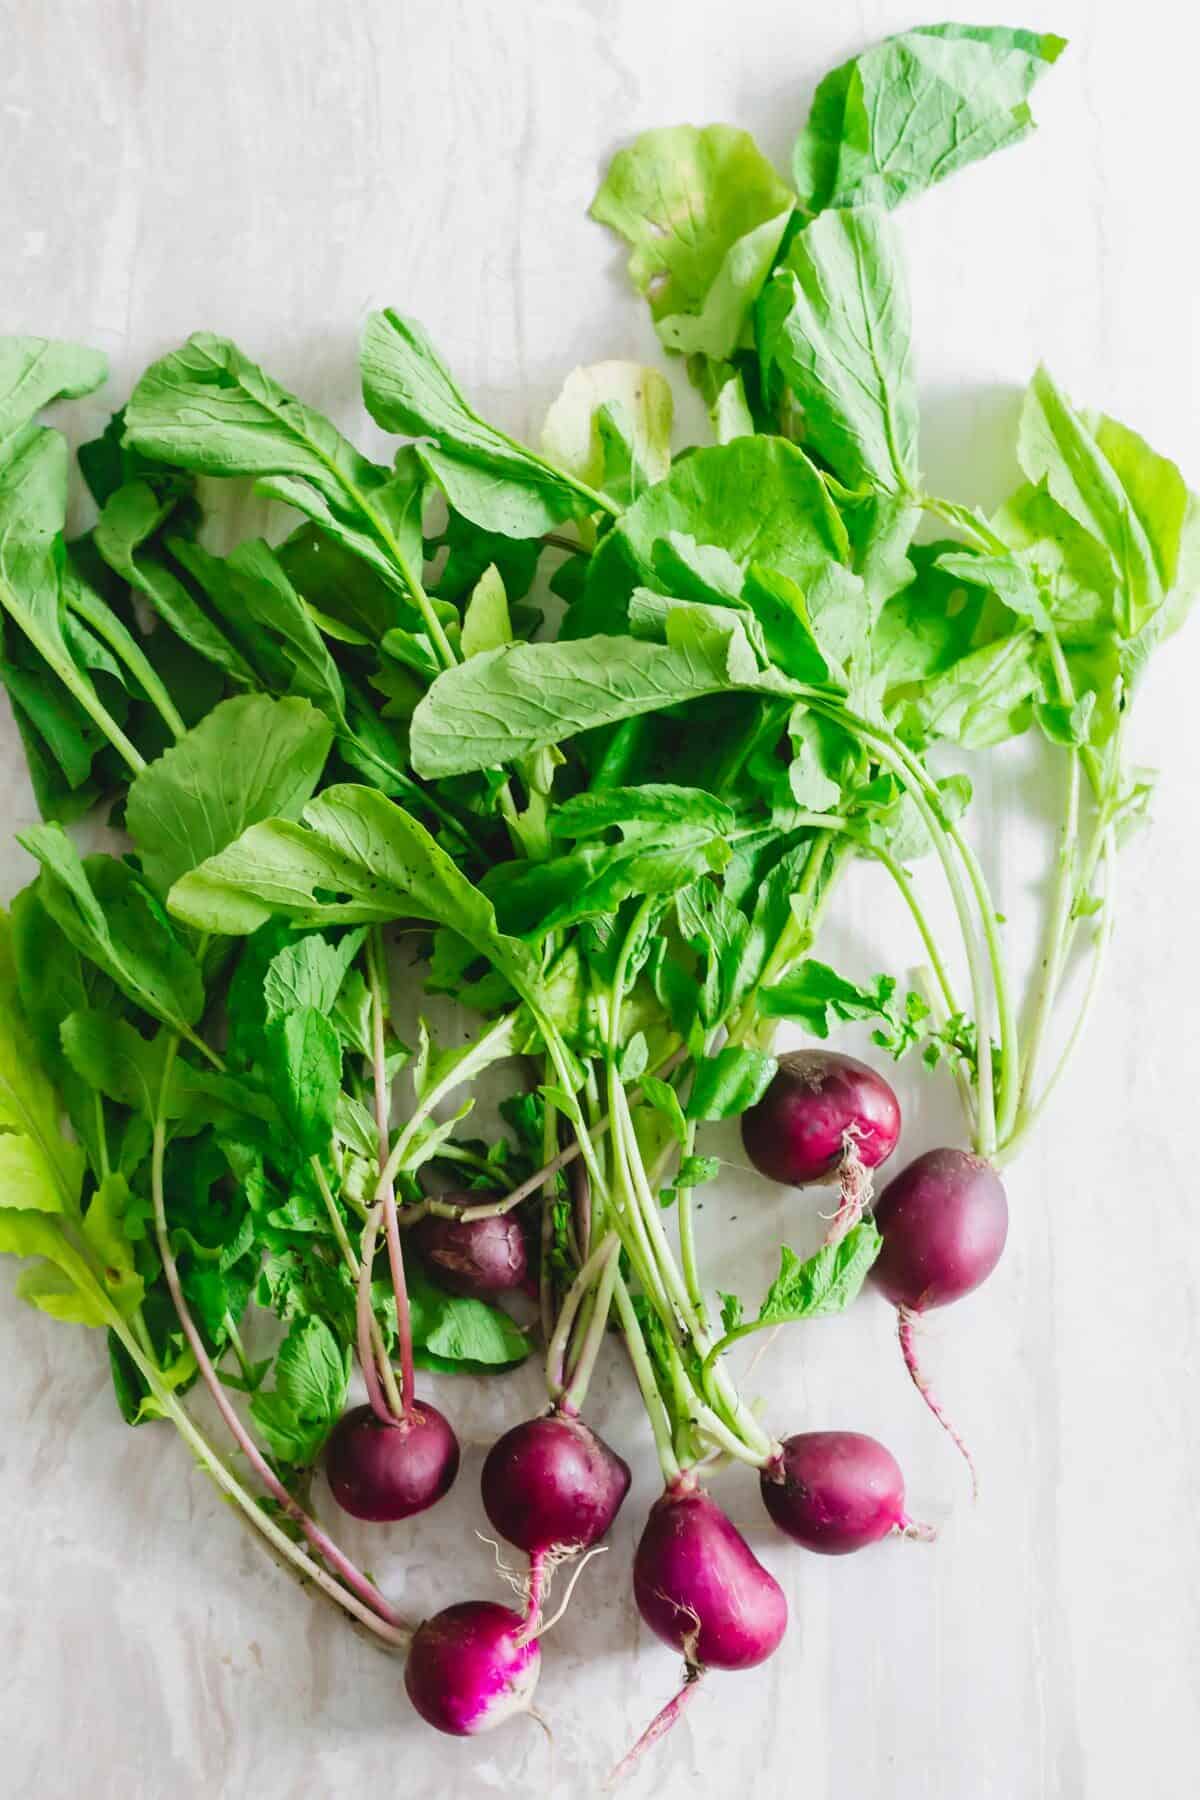 Bunch of radishes with greens attached.